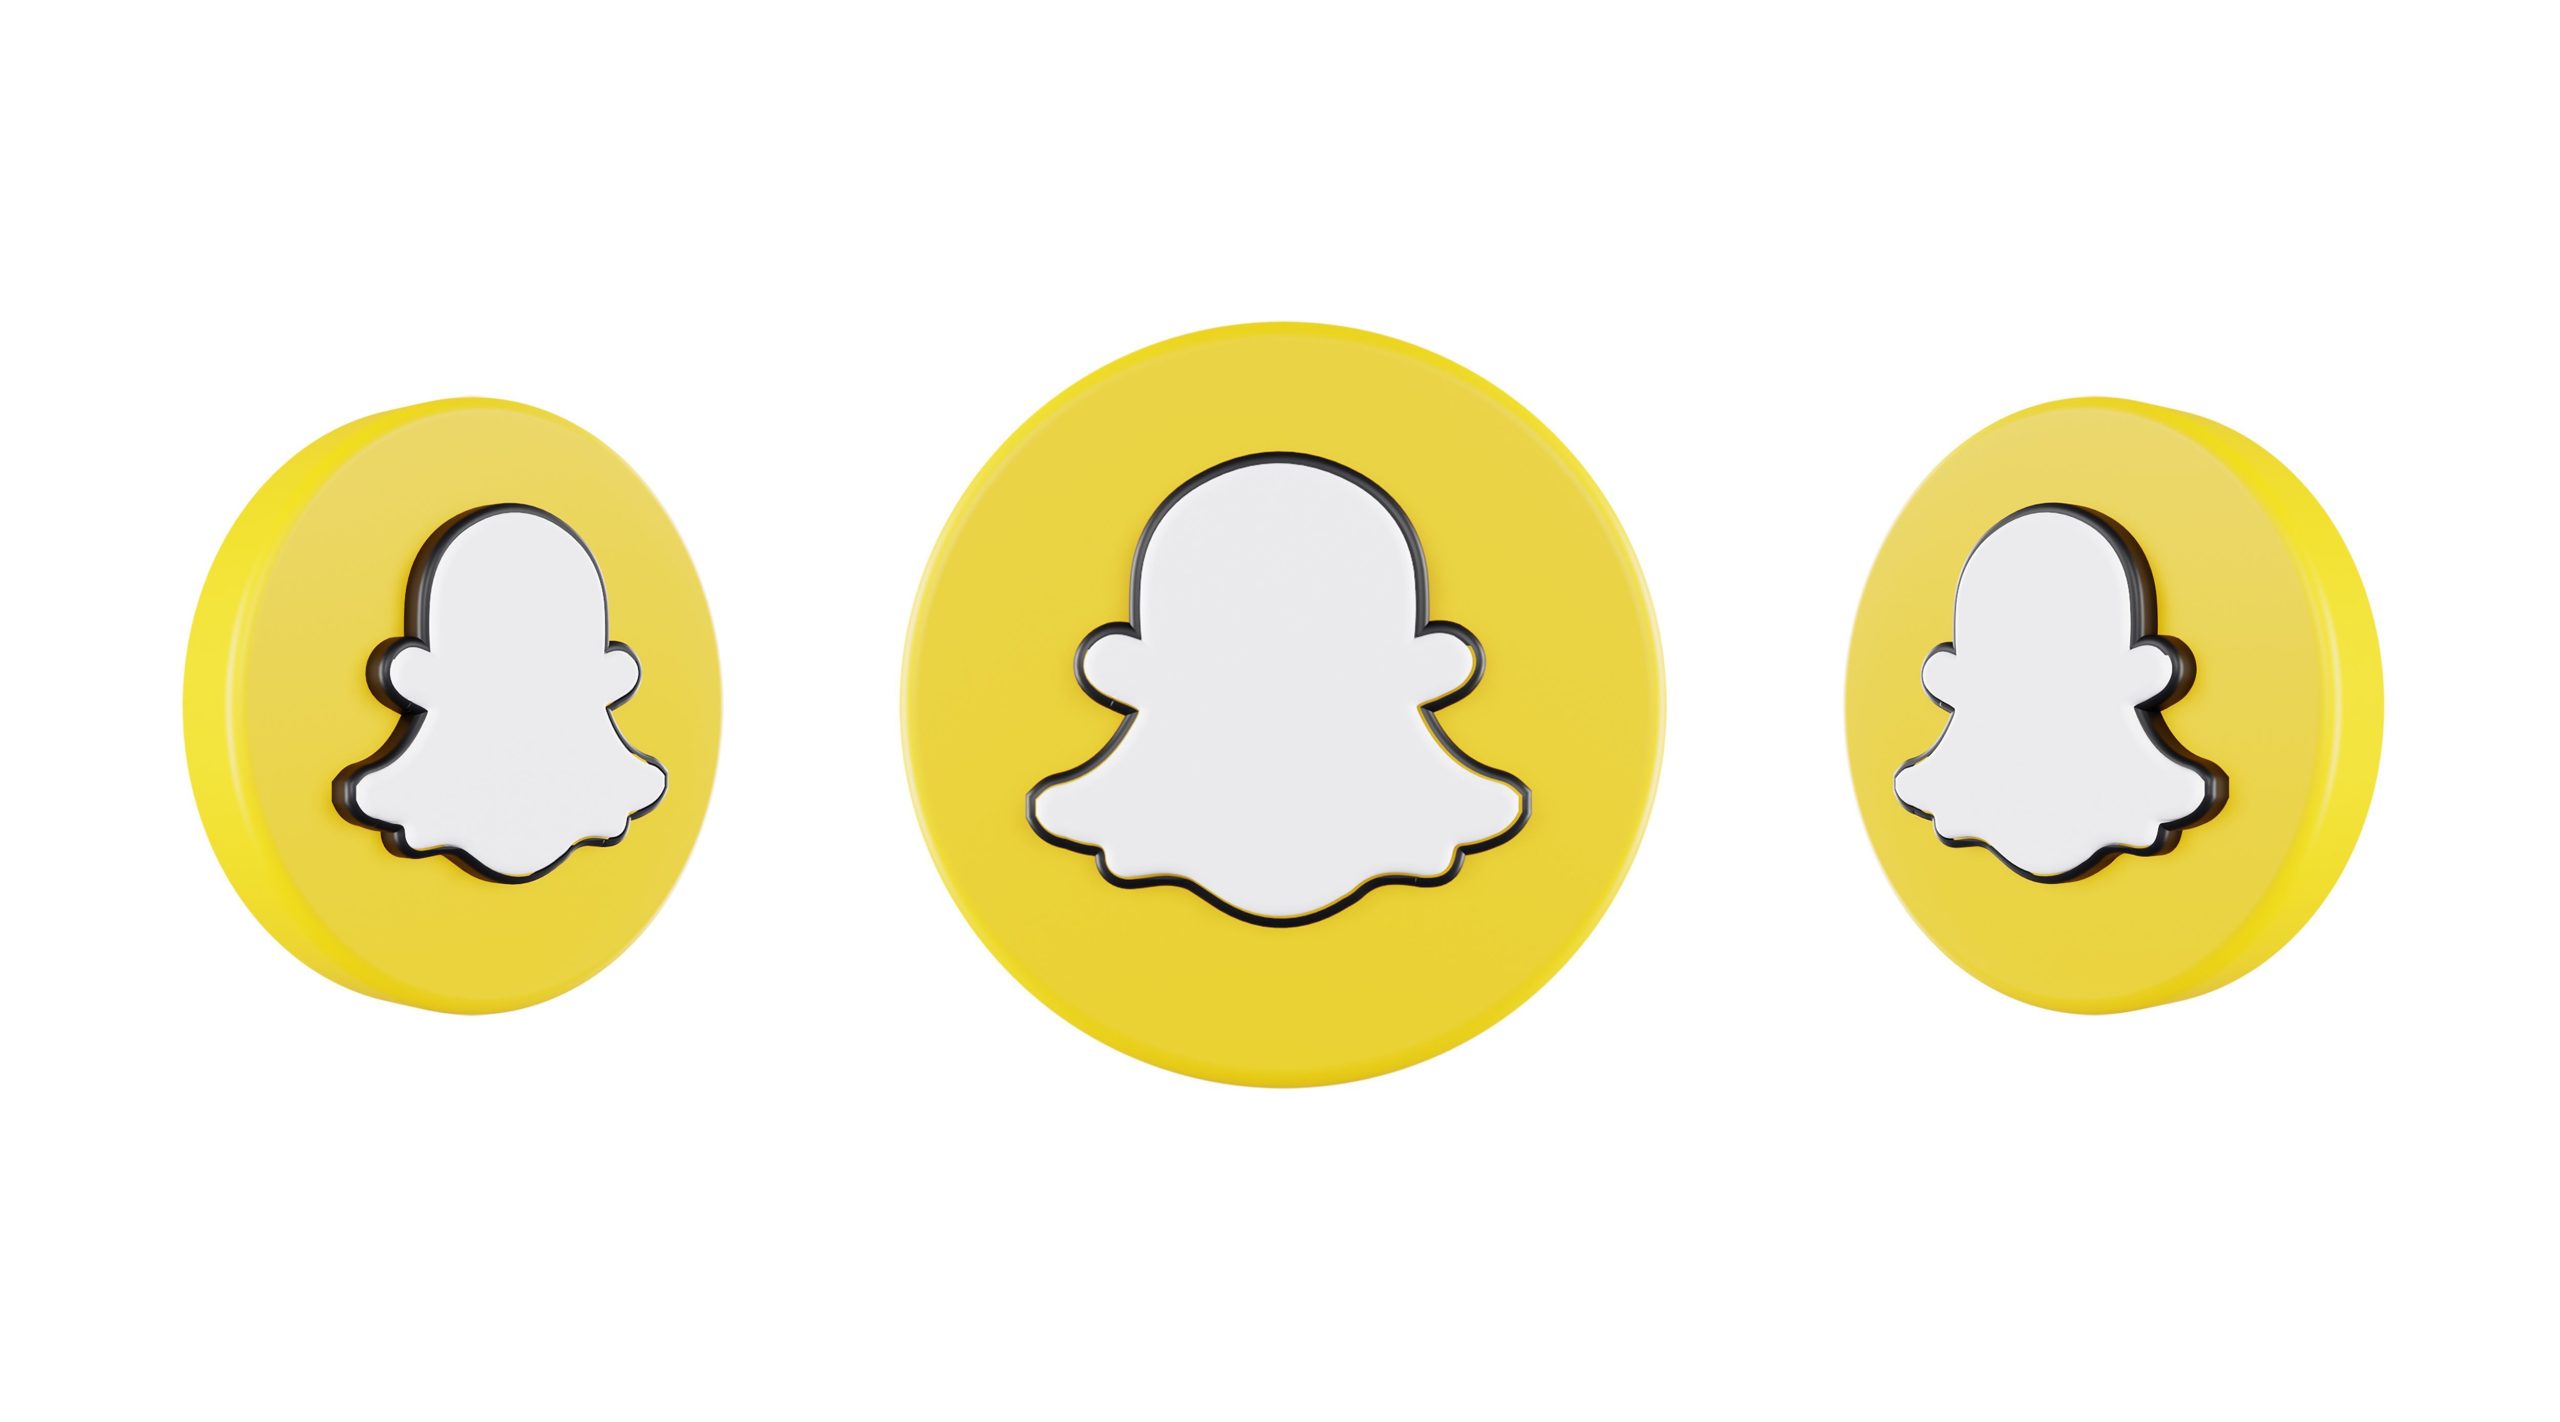 How to create and manage a snapchat group